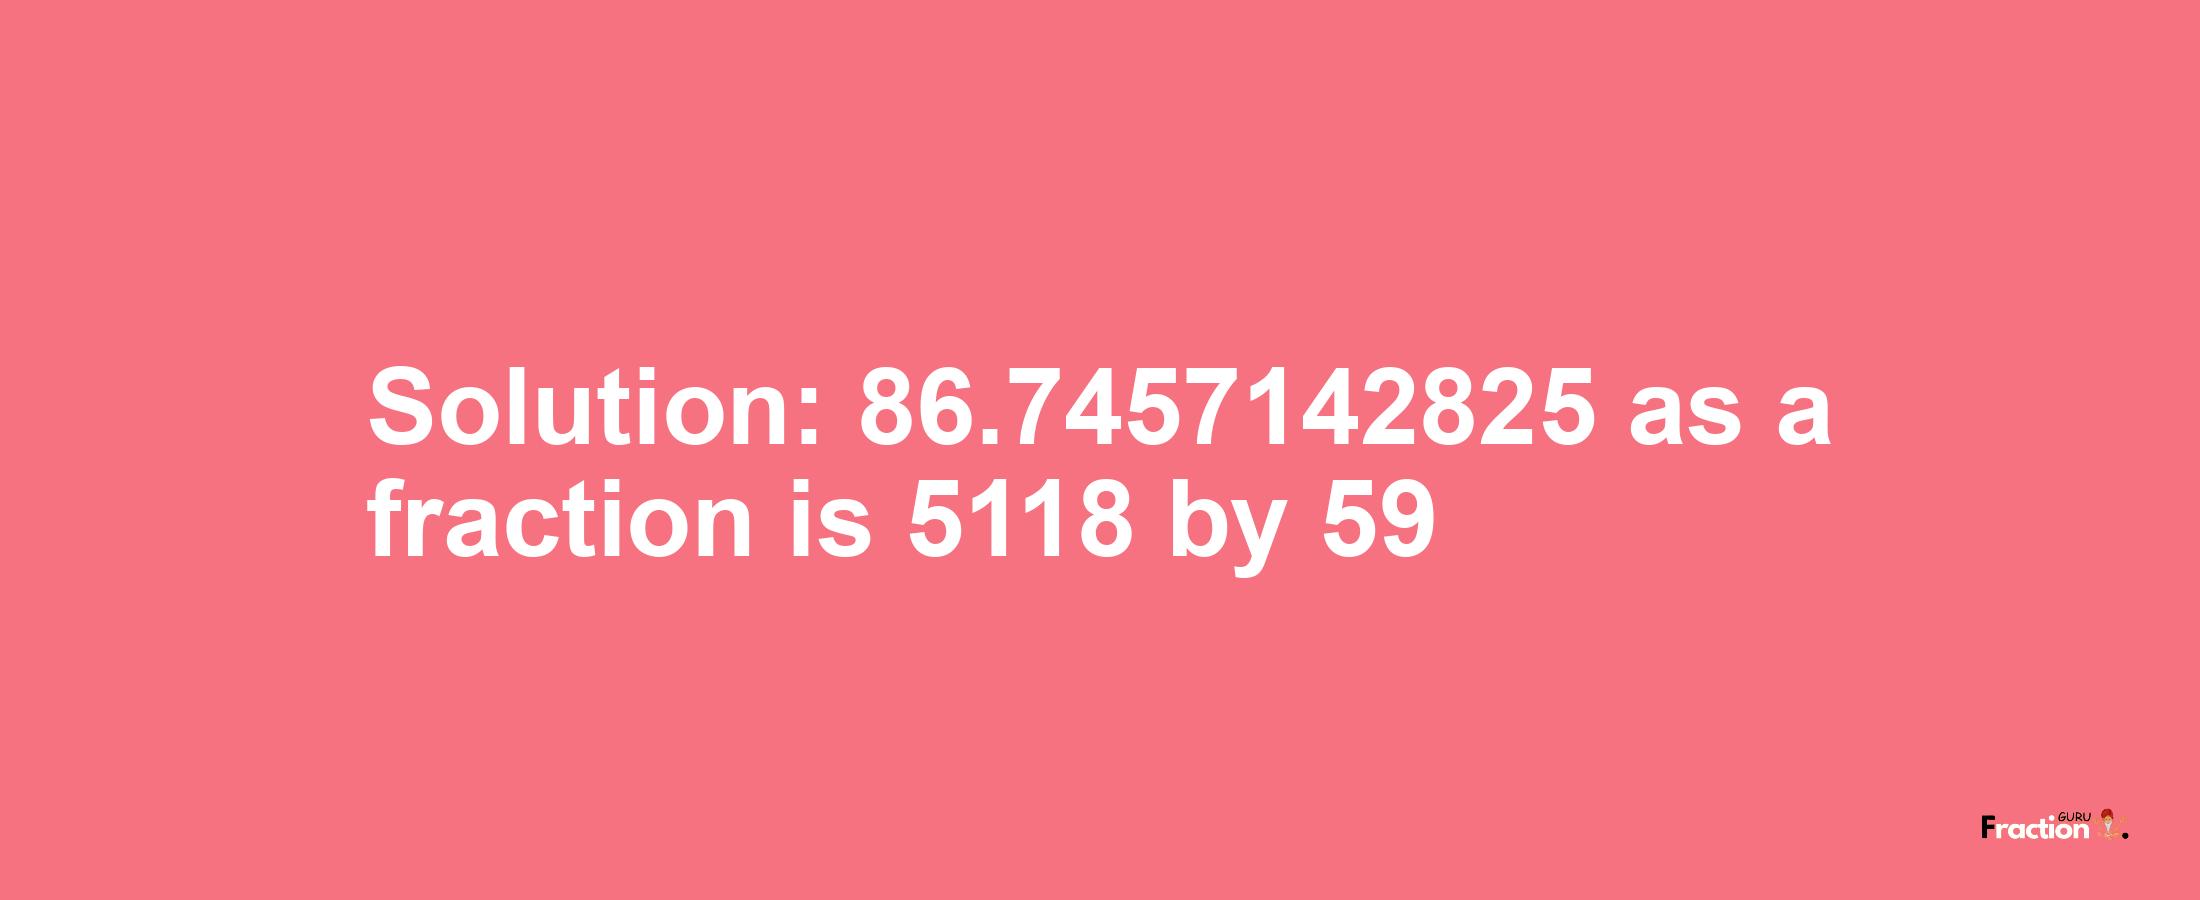 Solution:86.7457142825 as a fraction is 5118/59